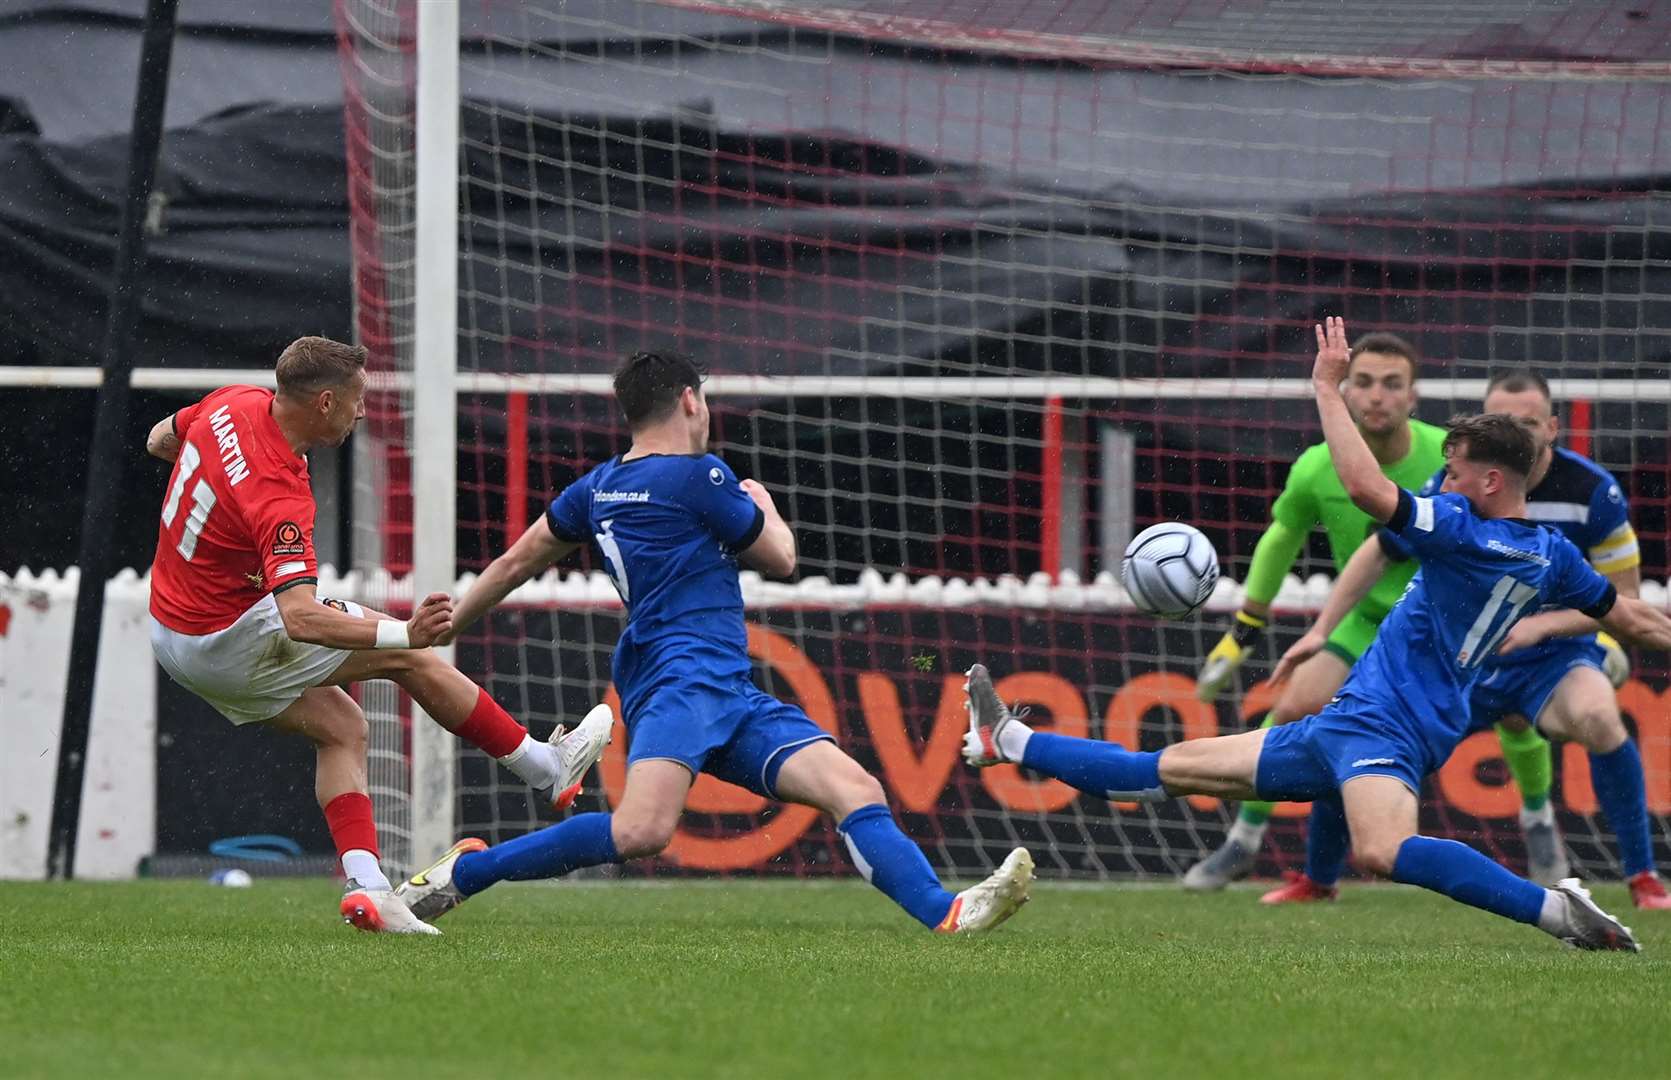 Lee Martin scores in extra-time. Picture: Keith Gillard